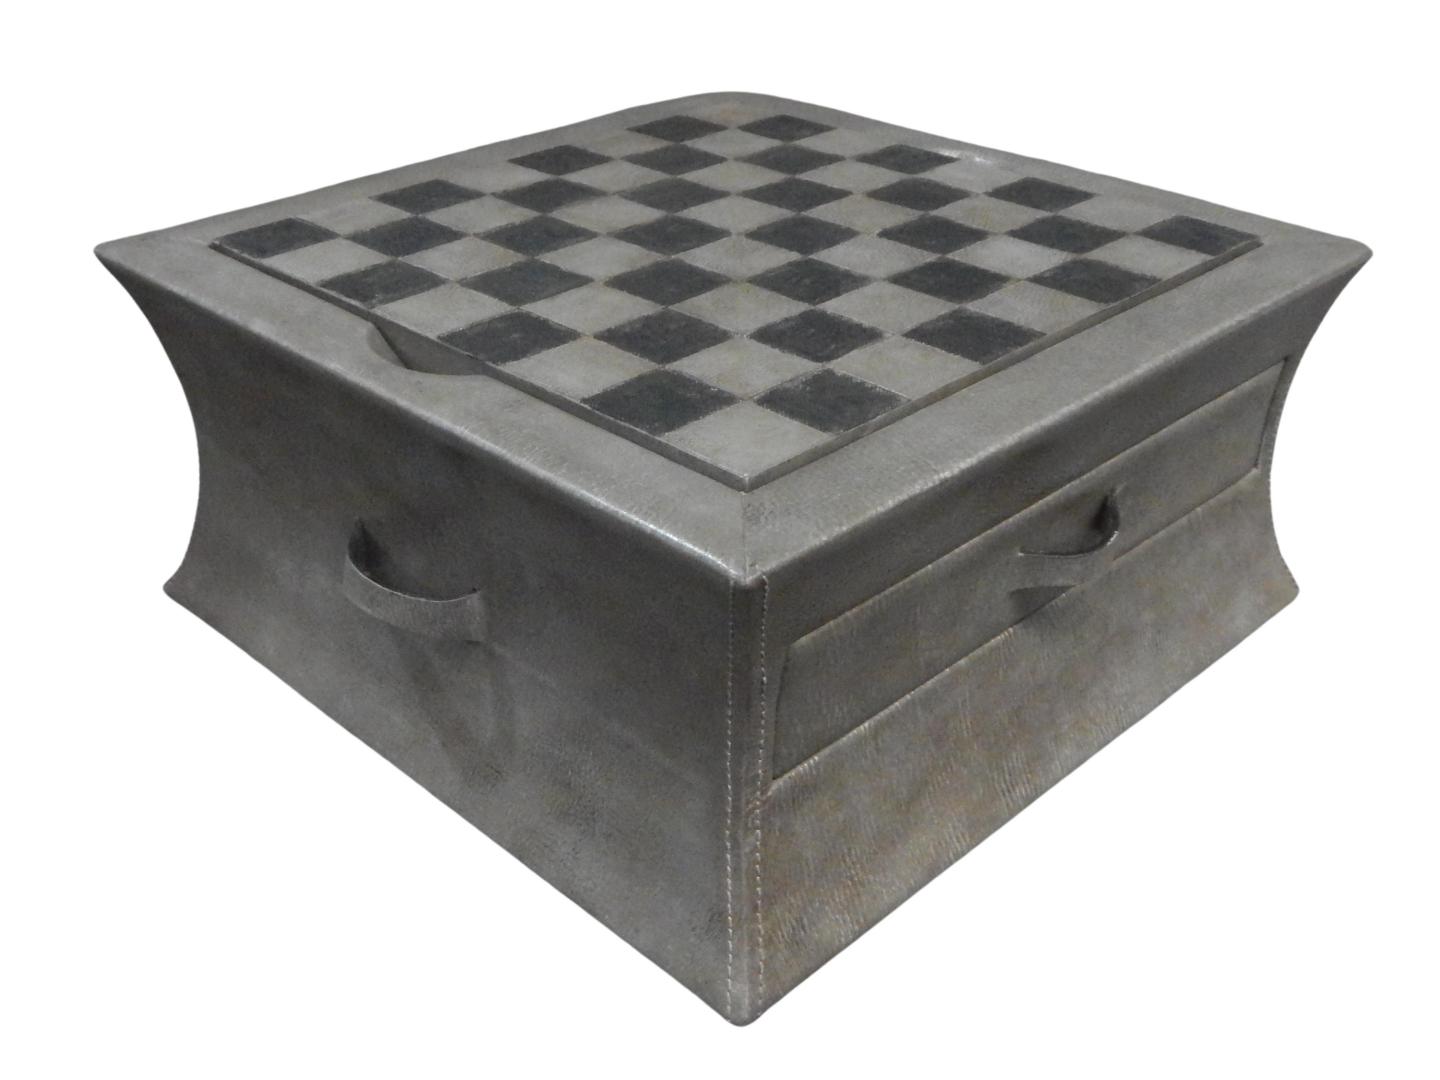 The leather game box for card games with a stitchless/stitches design and chess